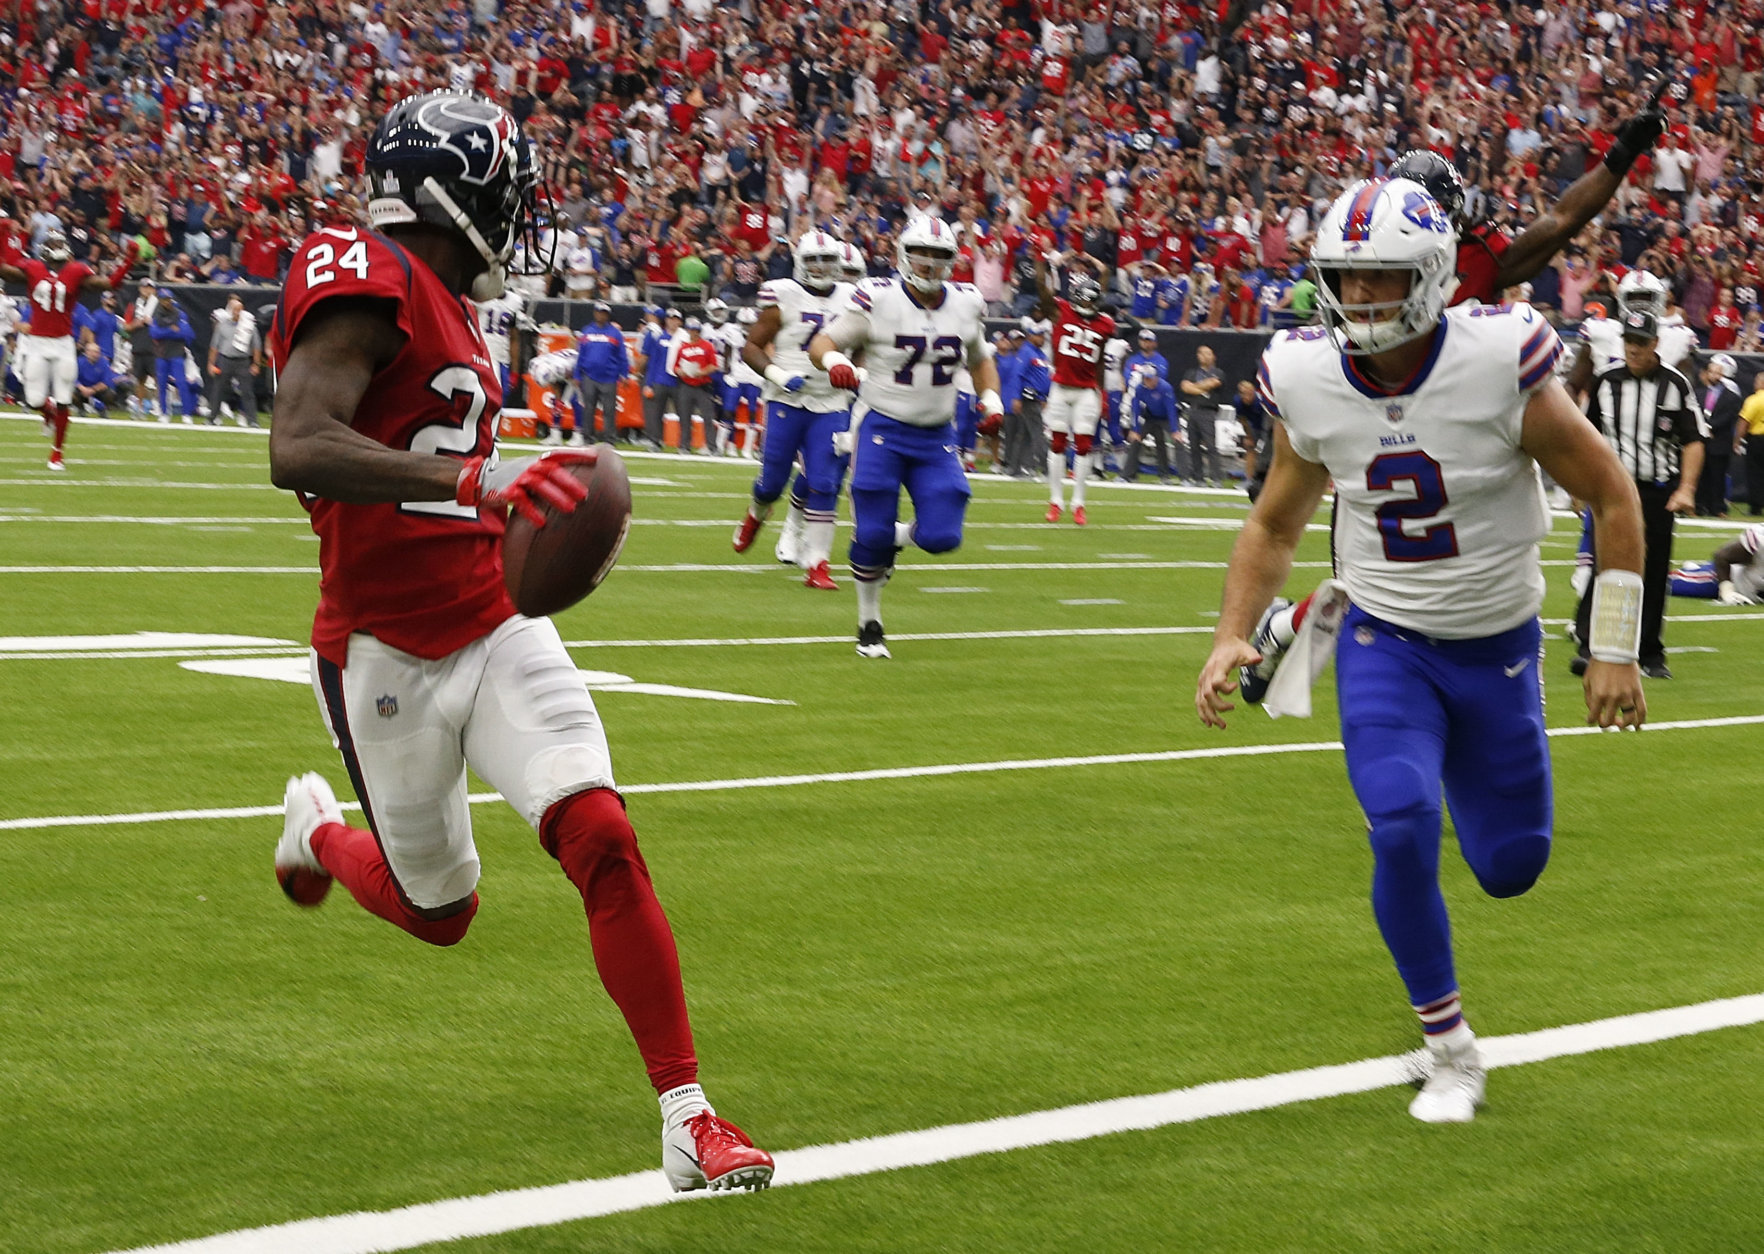 HOUSTON, TX - OCTOBER 14:  Johnathan Joseph #24 of the Houston Texans scores on an intereption as Nathan Peterman #2 of the Buffalo Bills is late on the coverage at NRG Stadium on October 14, 2018 in Houston, Texas.  (Photo by Bob Levey/Getty Images)